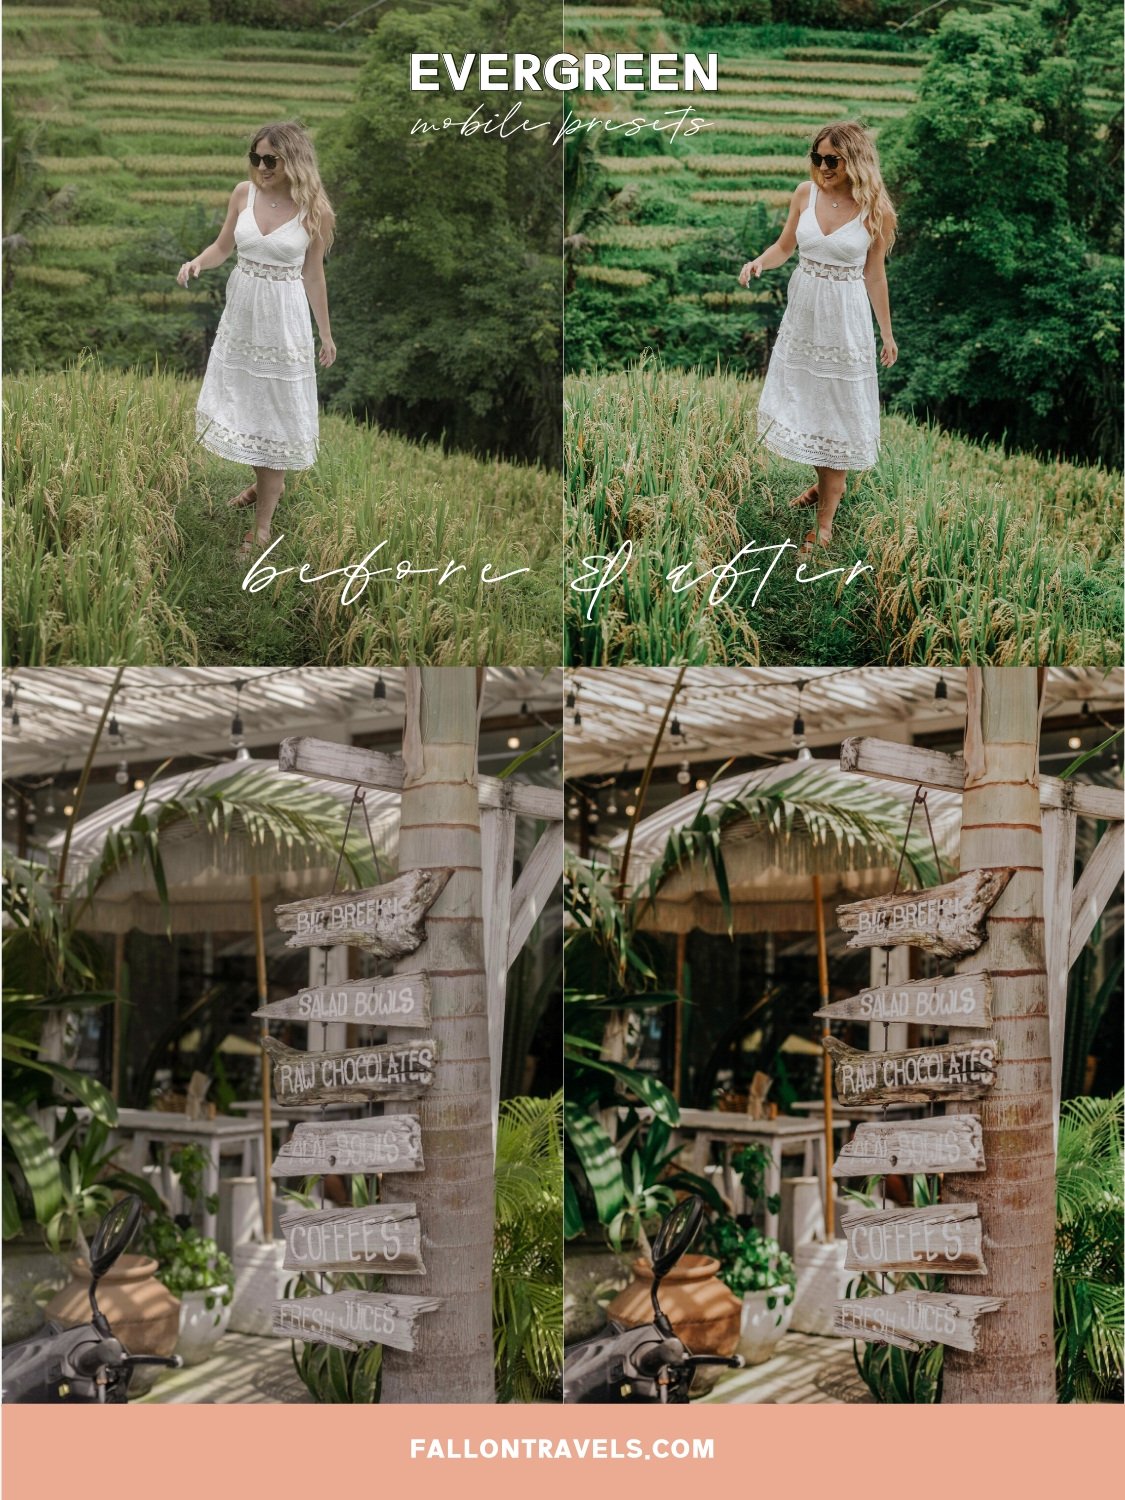 evergreen lightroom mobile presets dng fallontravels instagram photo editing 176